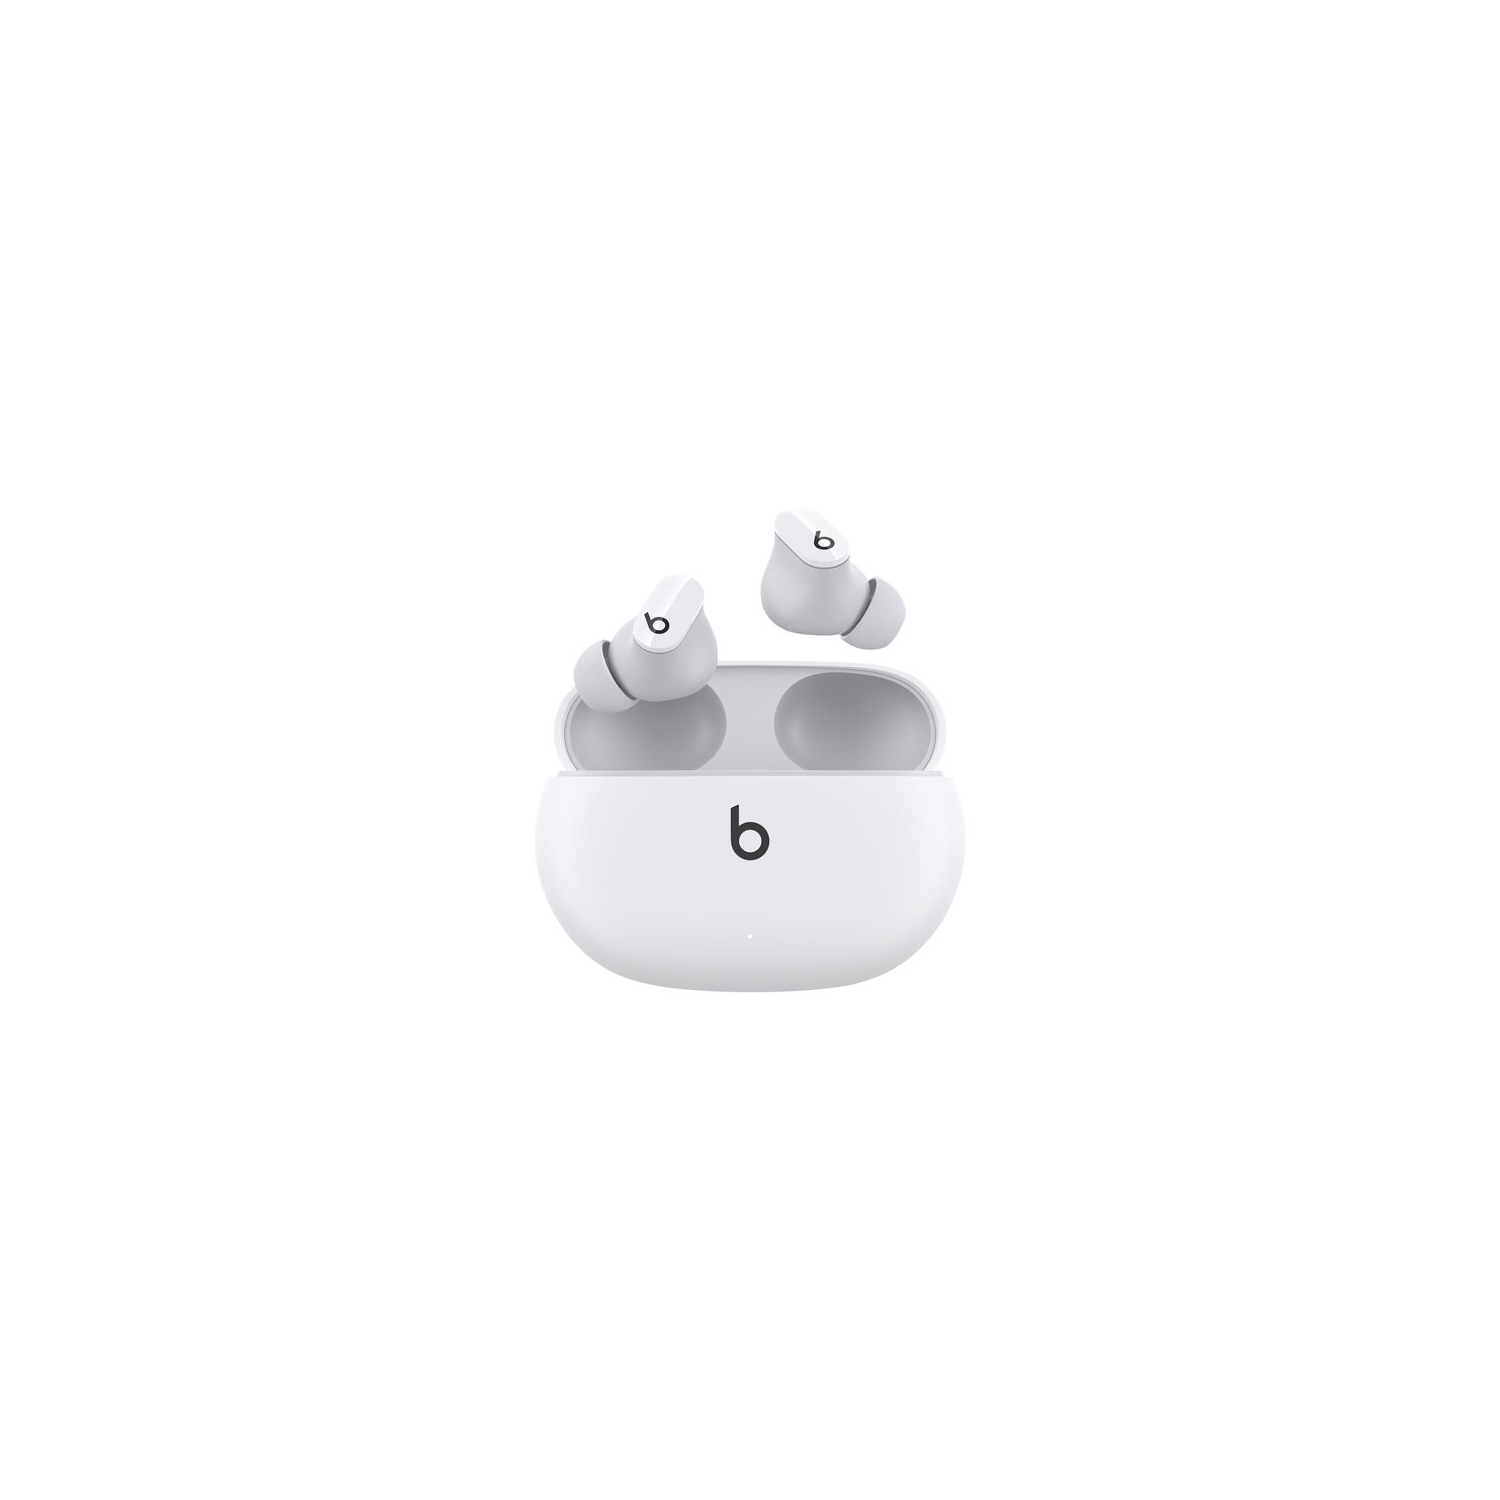 Refurbished (Excellent) - Beats By Dr. Dre Studio Buds In-Ear Noise Cancelling Truly Wireless Headphones - White